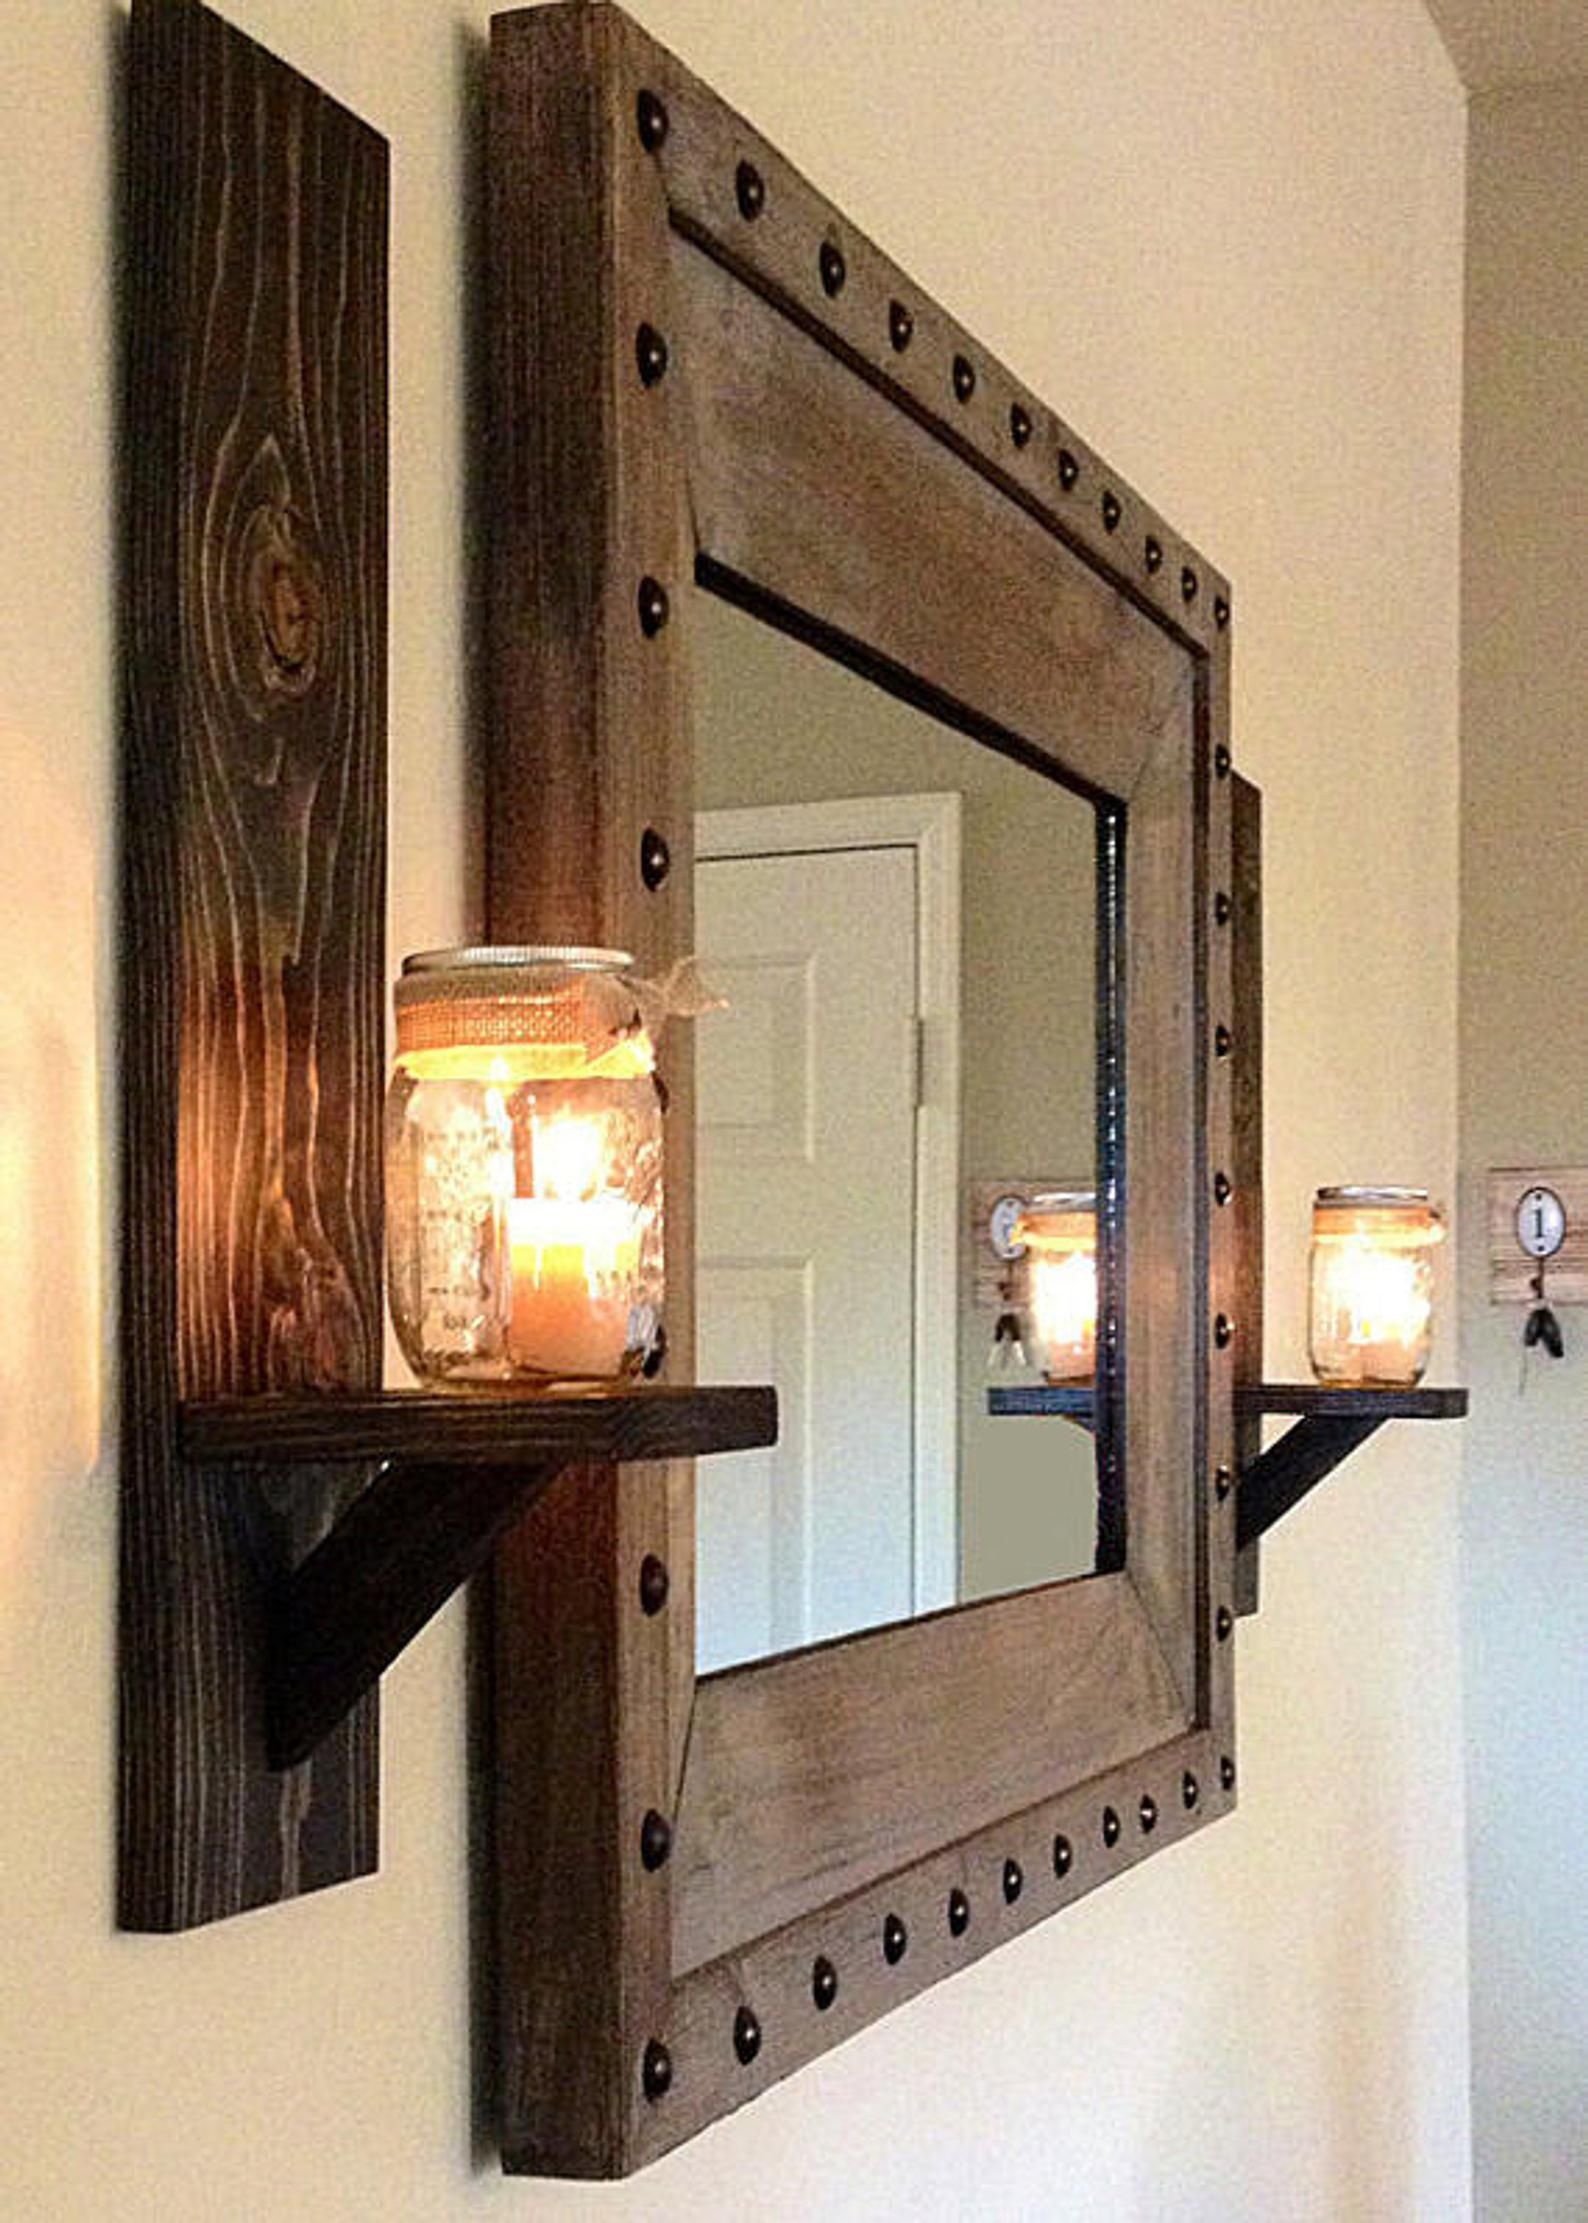 Hanging Shelf Cherry Farmhouse Wall Decor Large Wooden Handmade Wallmounted Rustic Pillar Candle Sconce 4 Rustic Candleholders Floating Shelves | Wall-mount Wooden Candle Holders